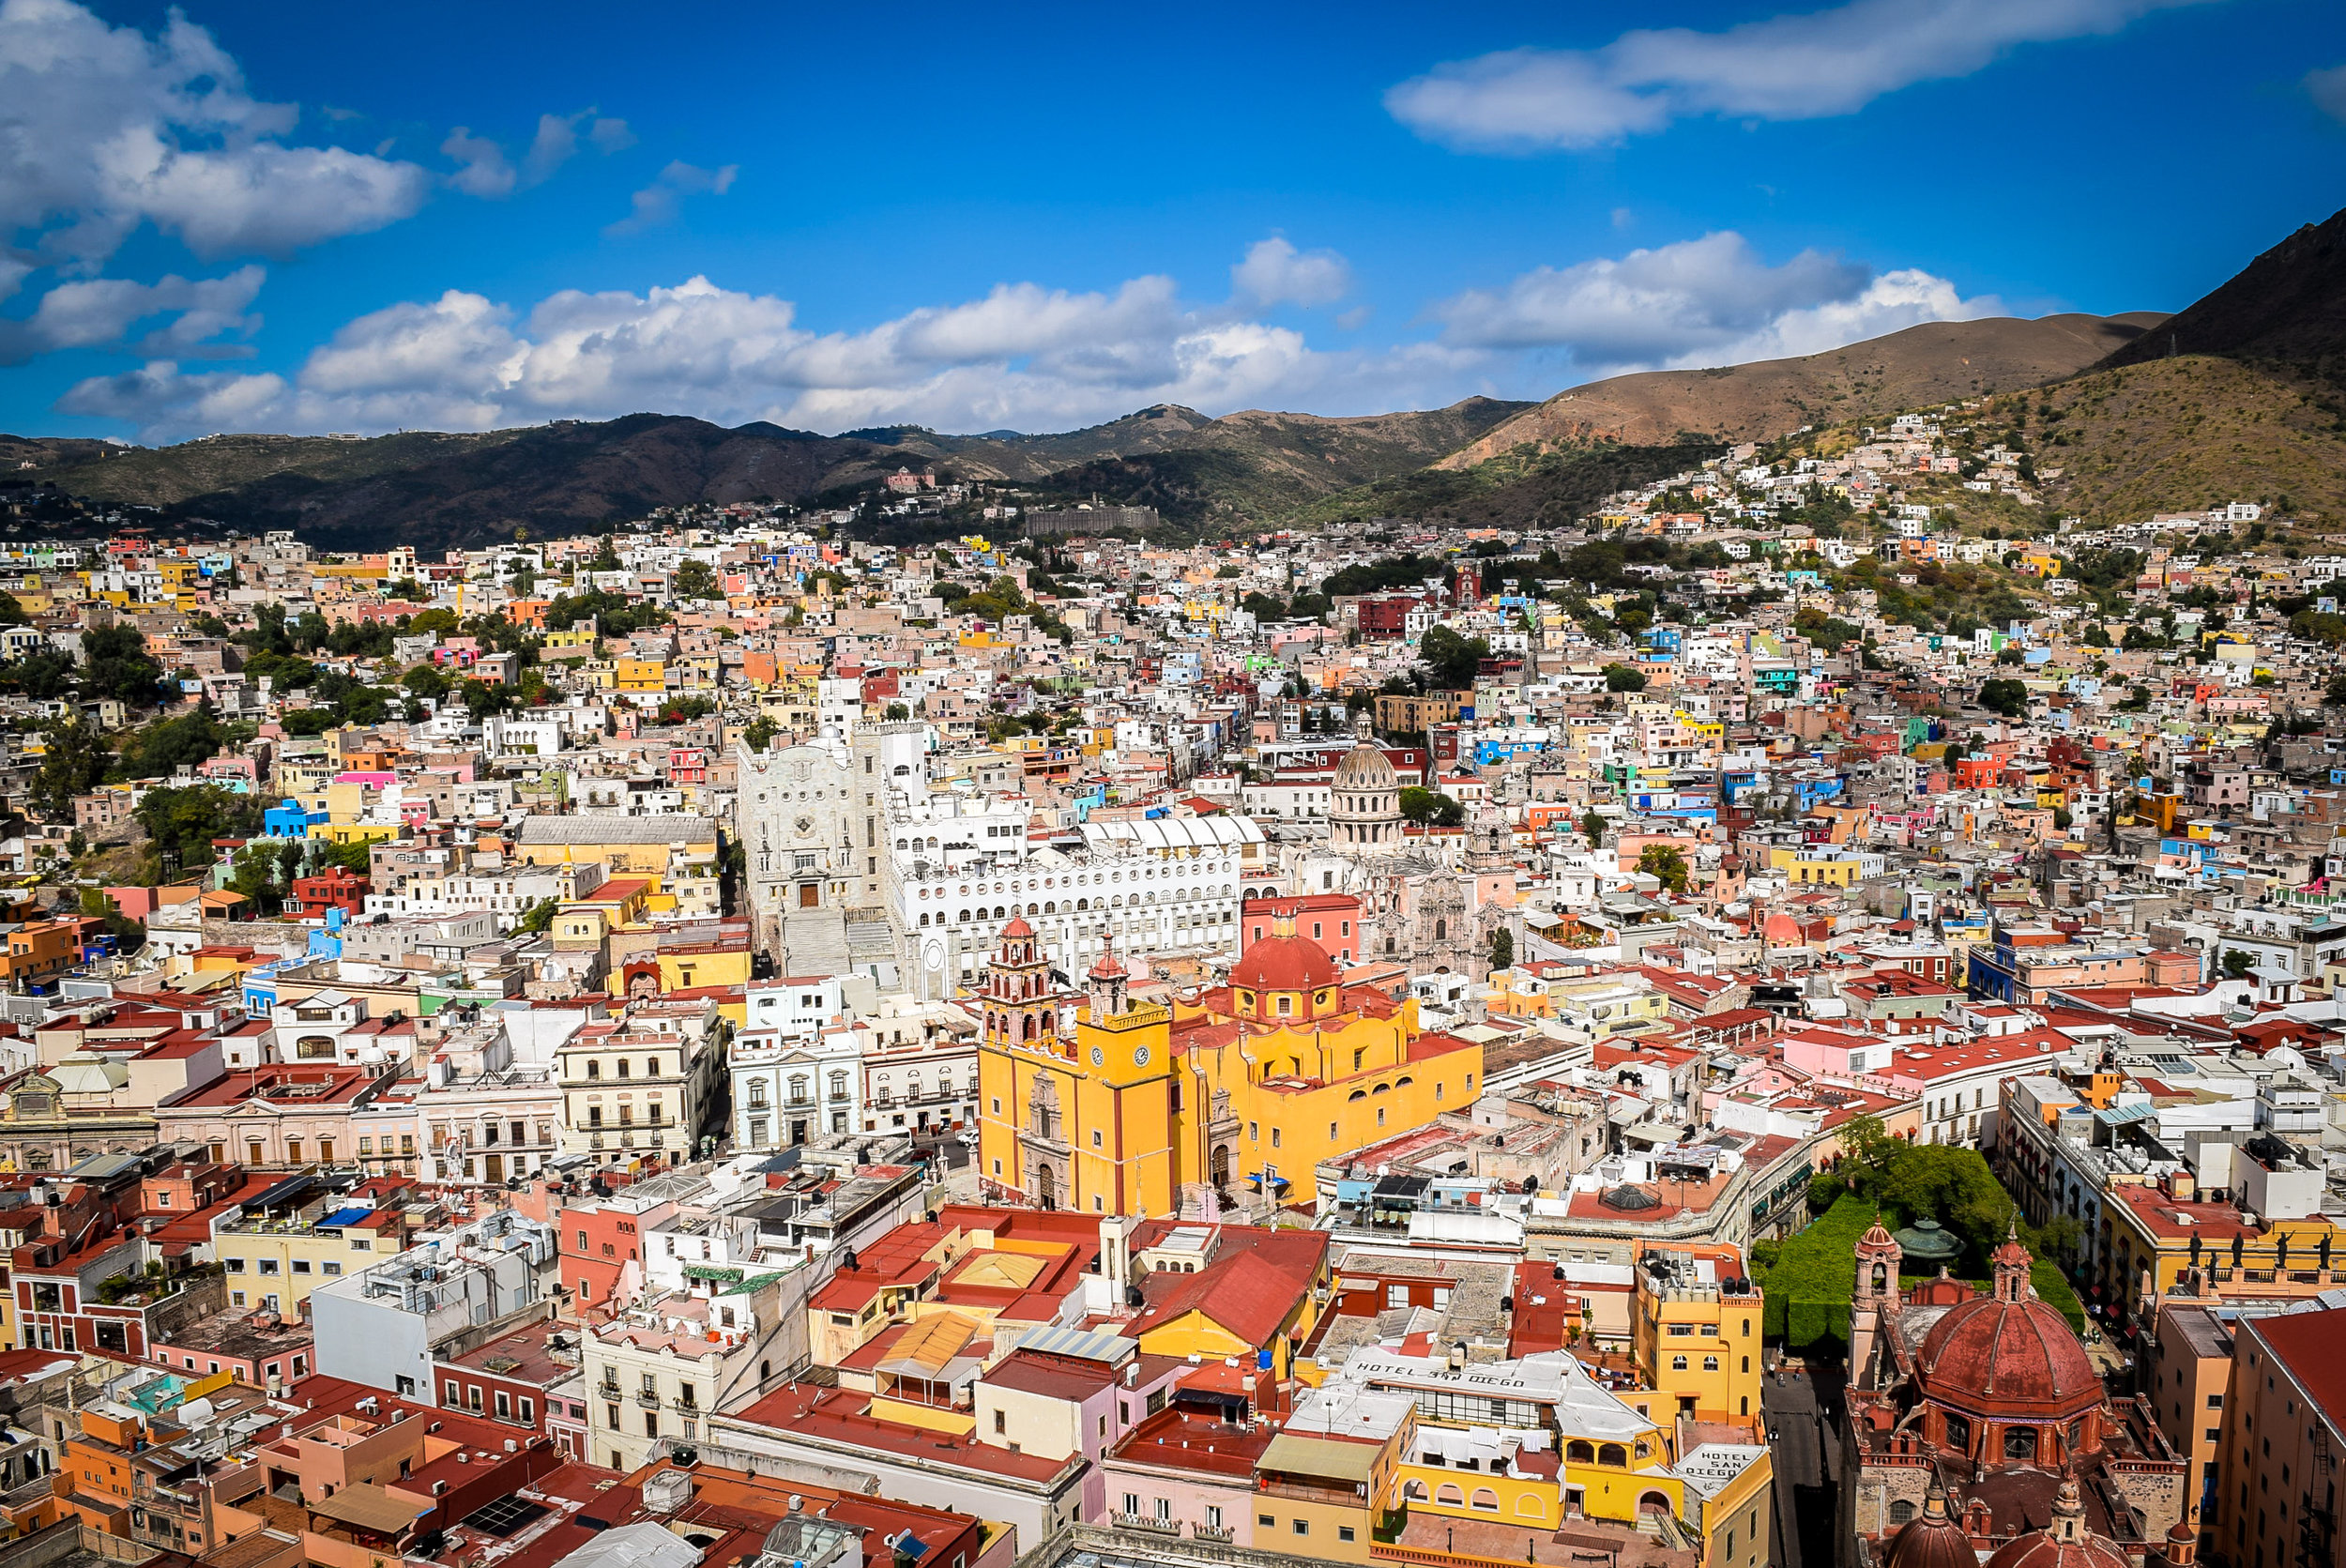 11 Essential Things to Do in Guanajuato: A First-Timer's Guide